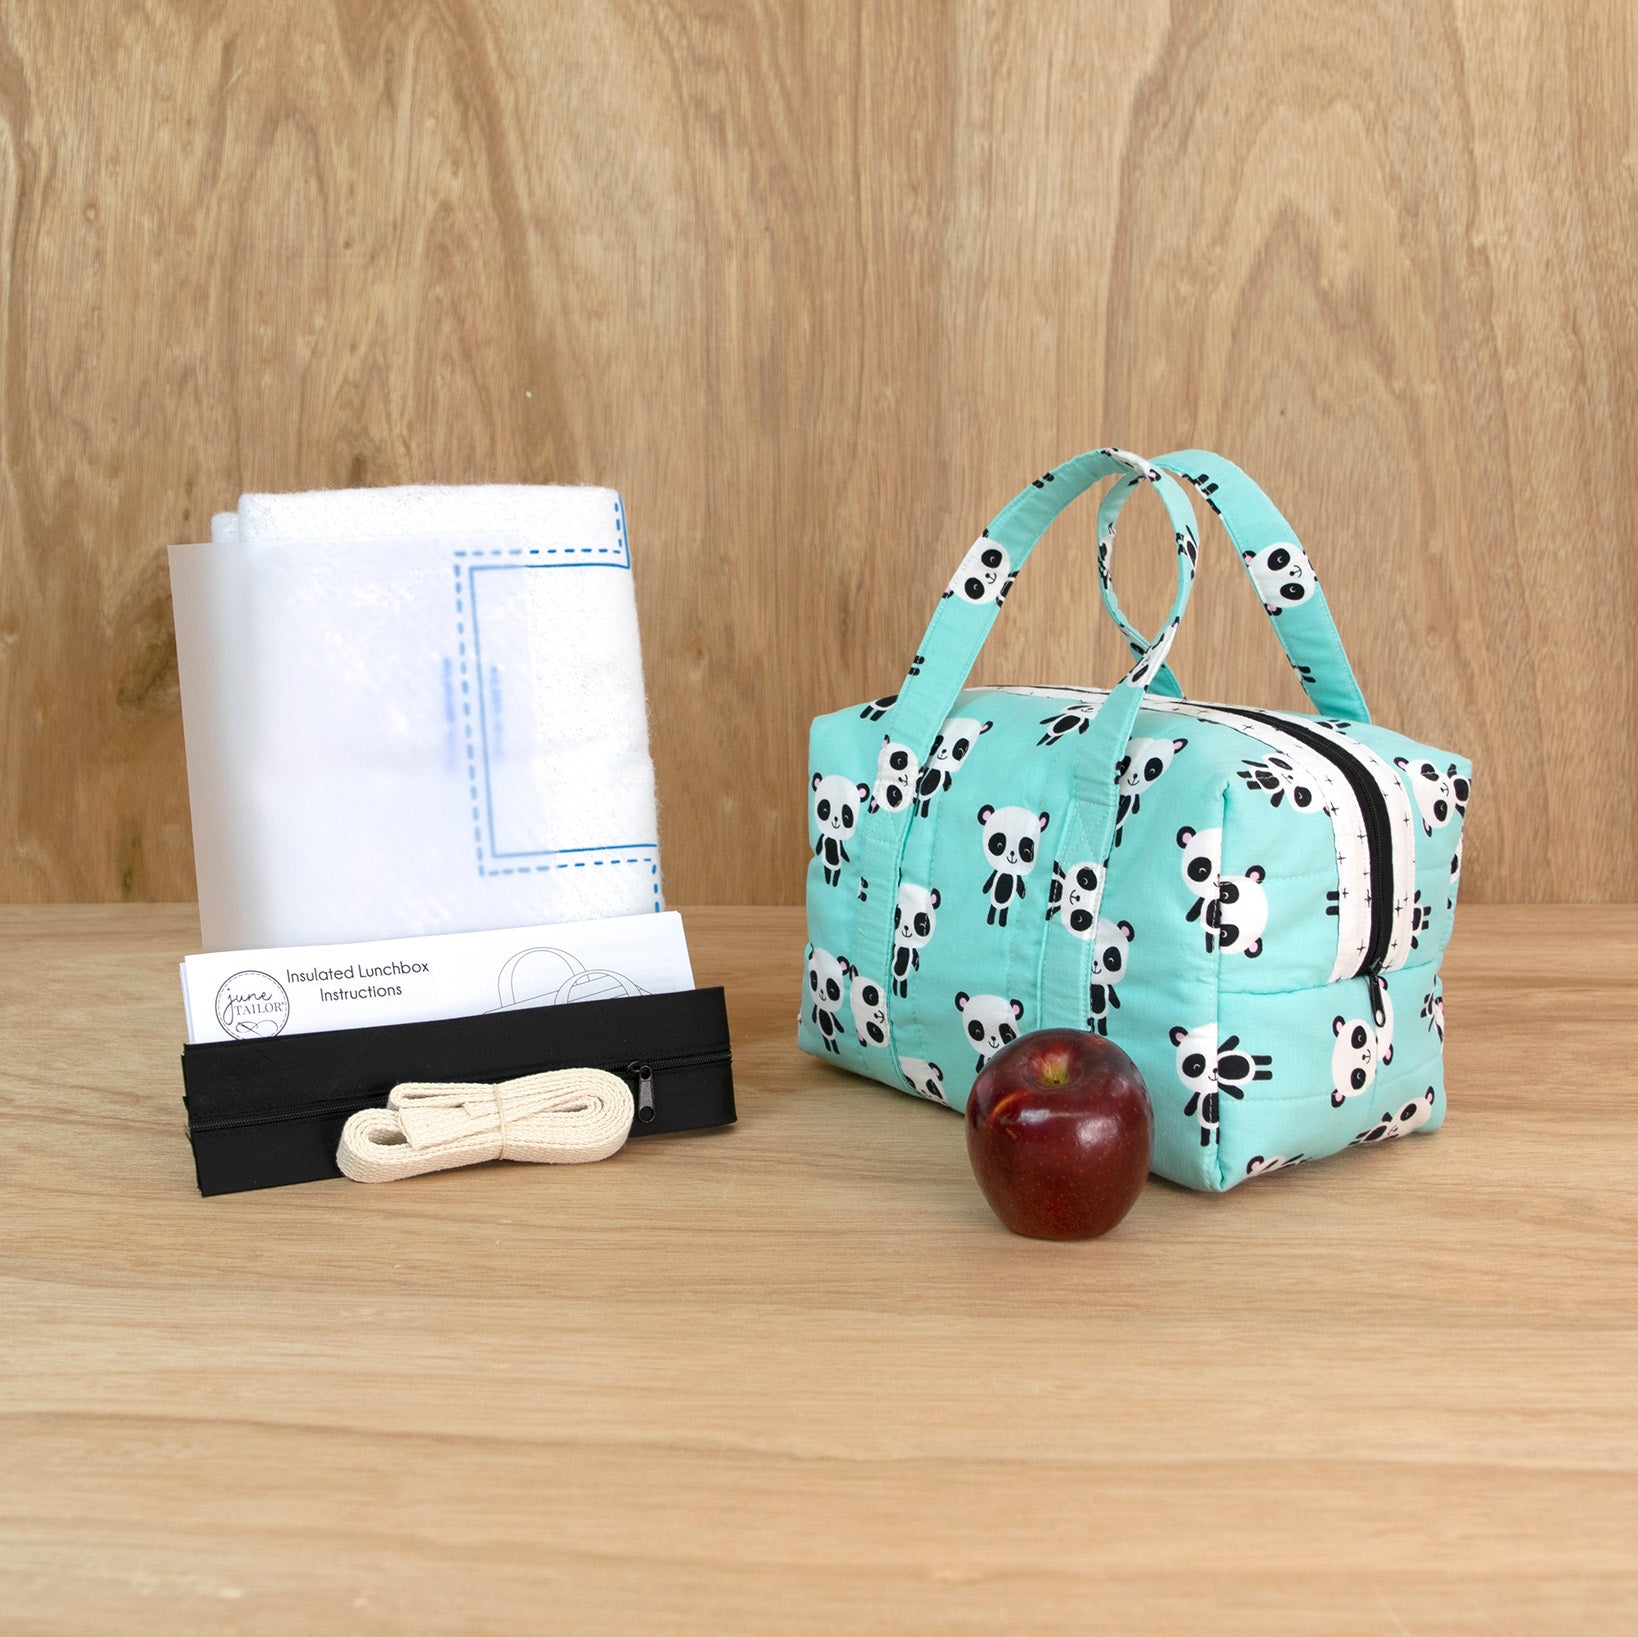 June Tailor Insulated Lunchbox Tote Kit - White Zippity - Do - Done